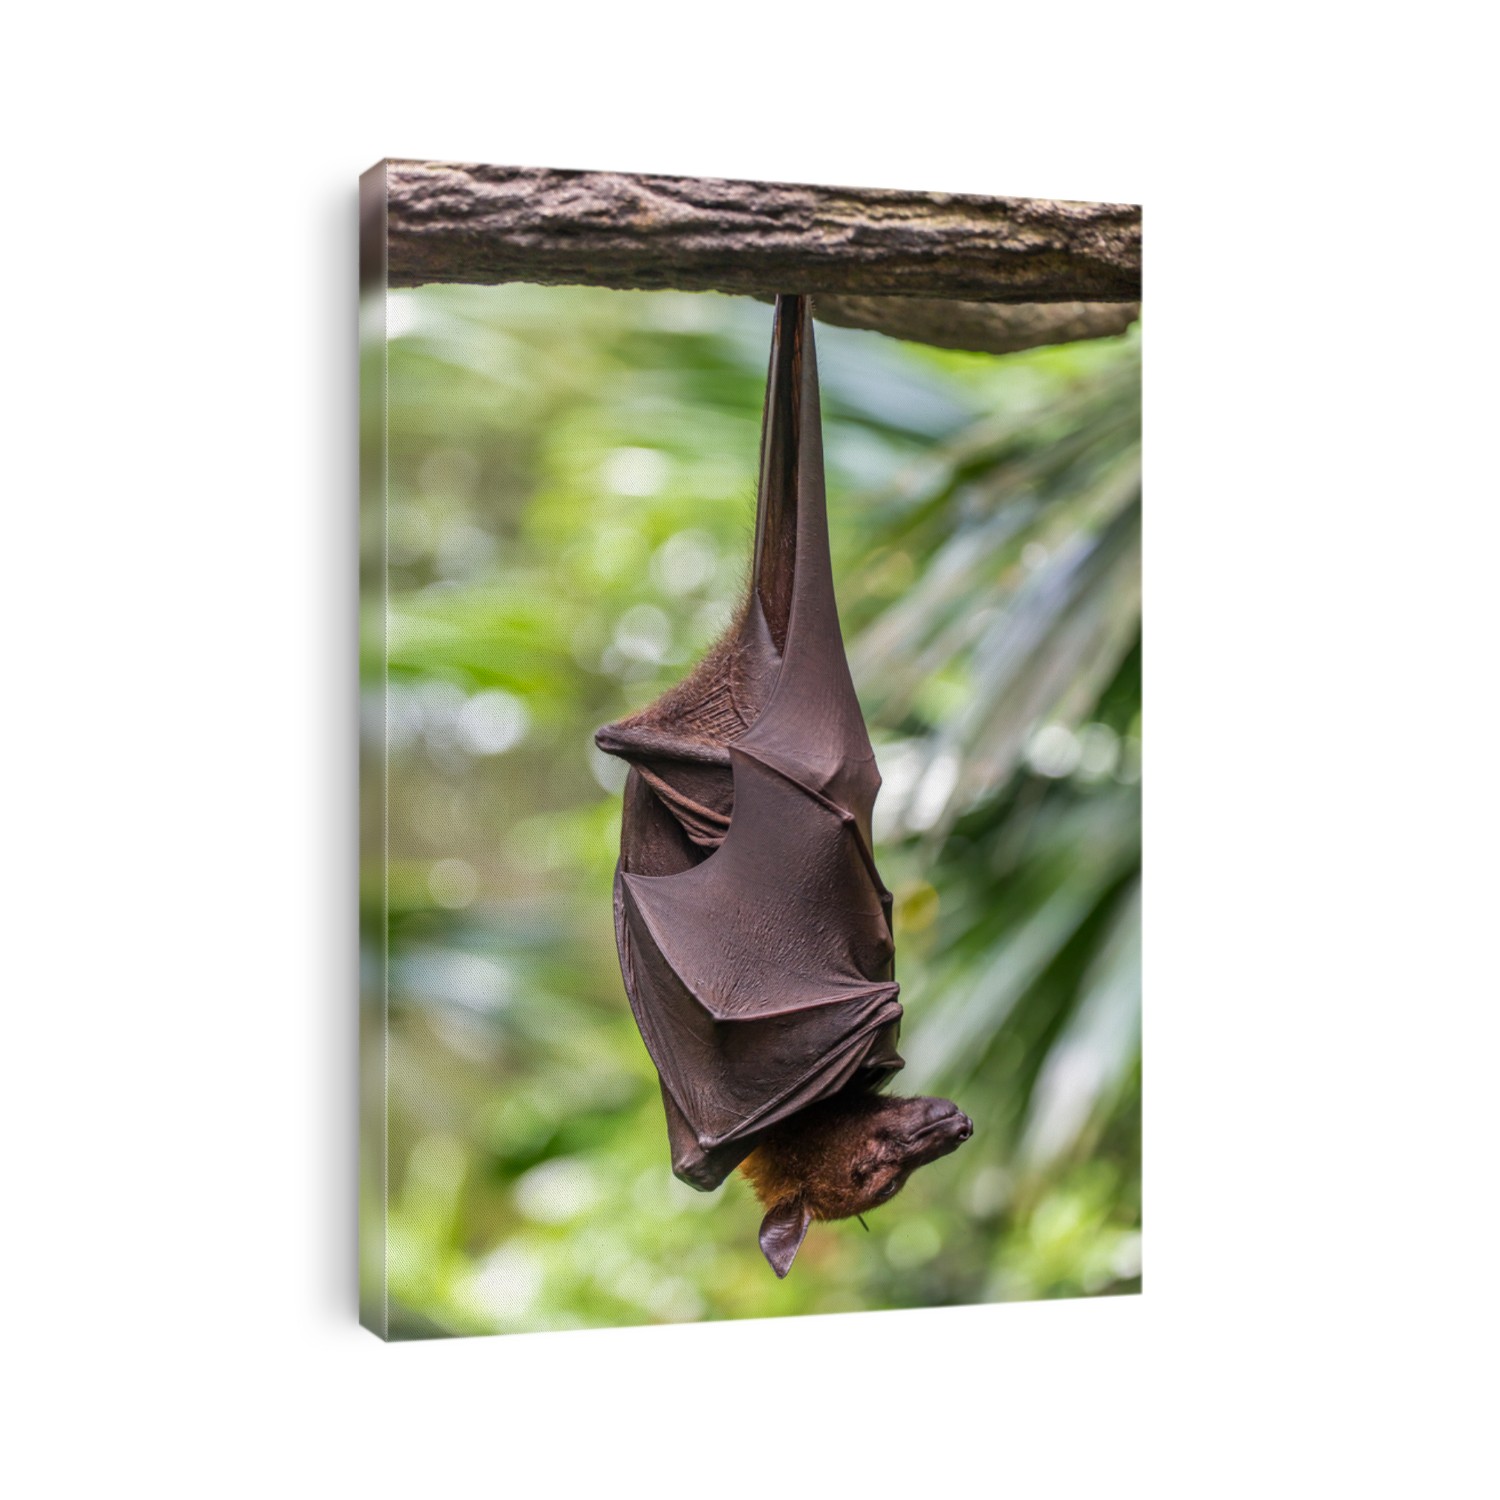 Large Malayan flying fox close-up portrait